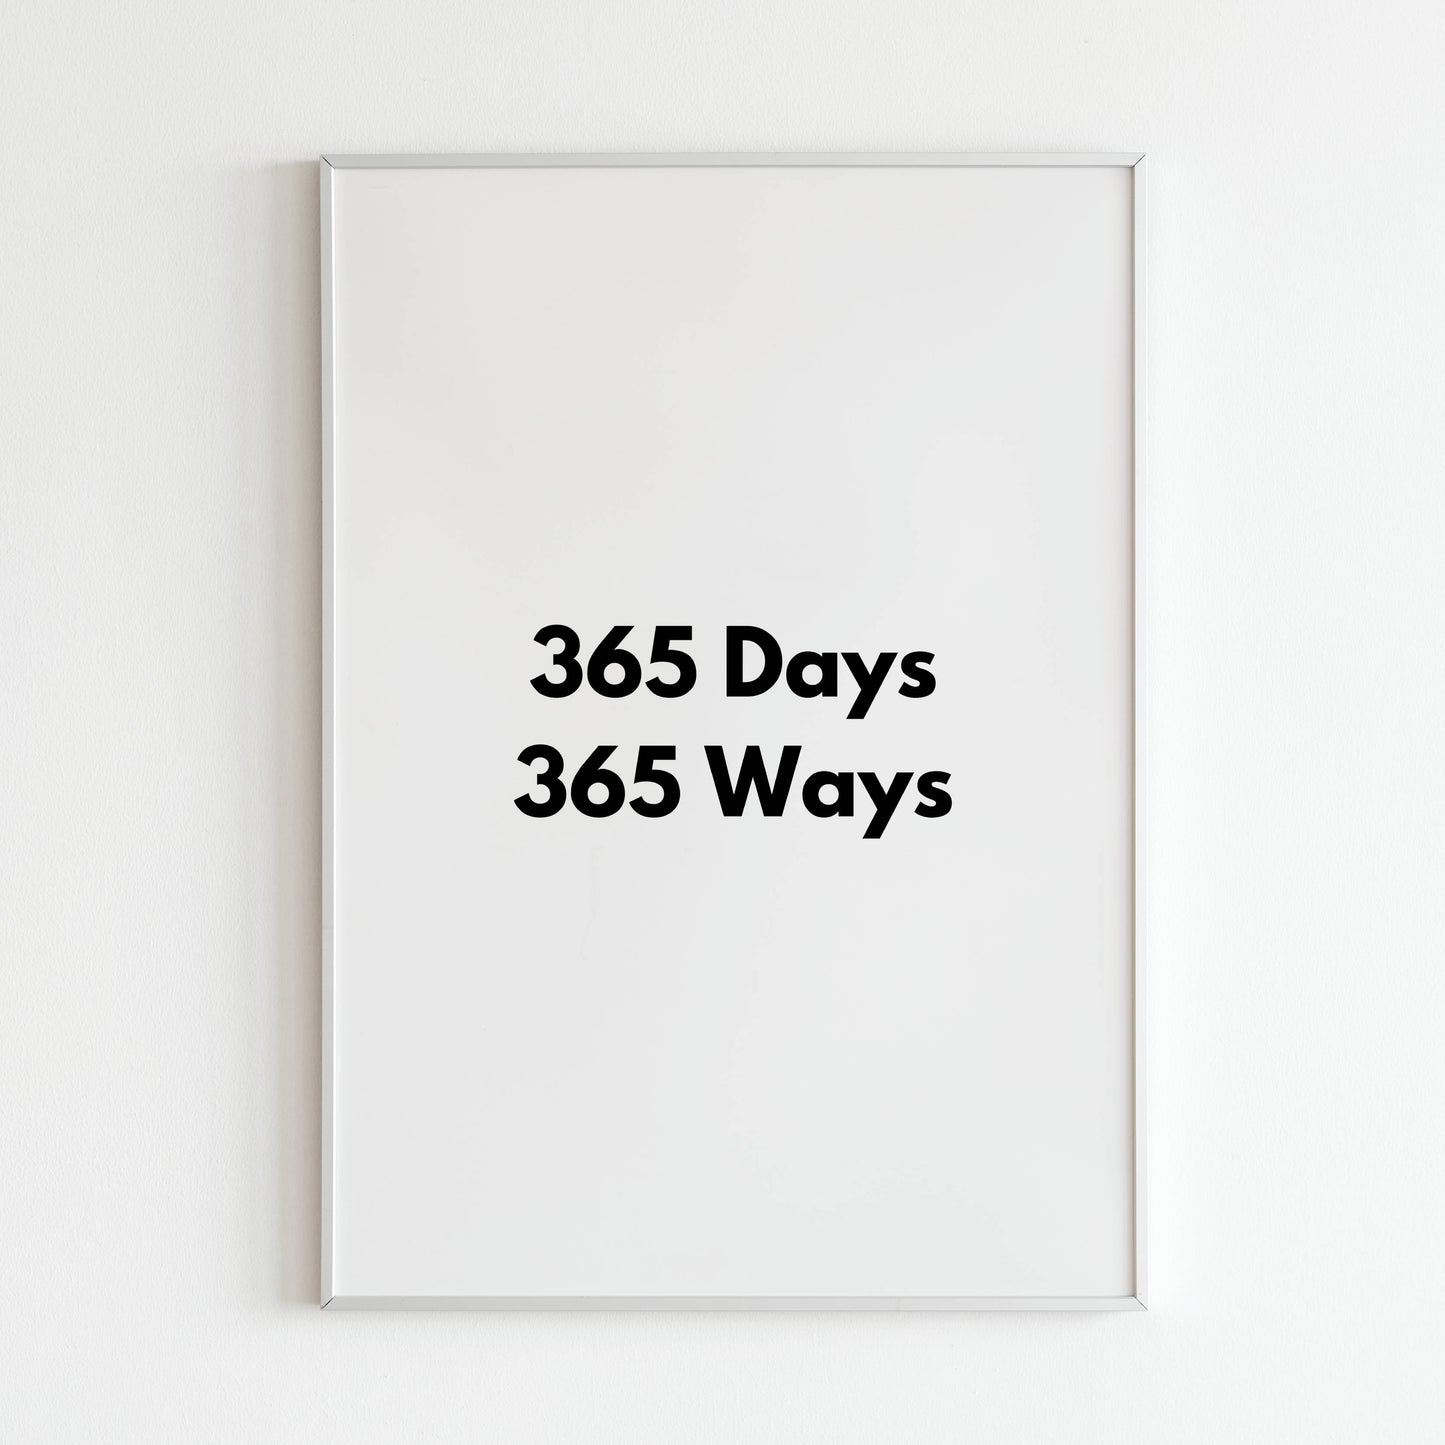 Downloadable "365 Days 365 Ways" wall art for embracing new possibilities every day.